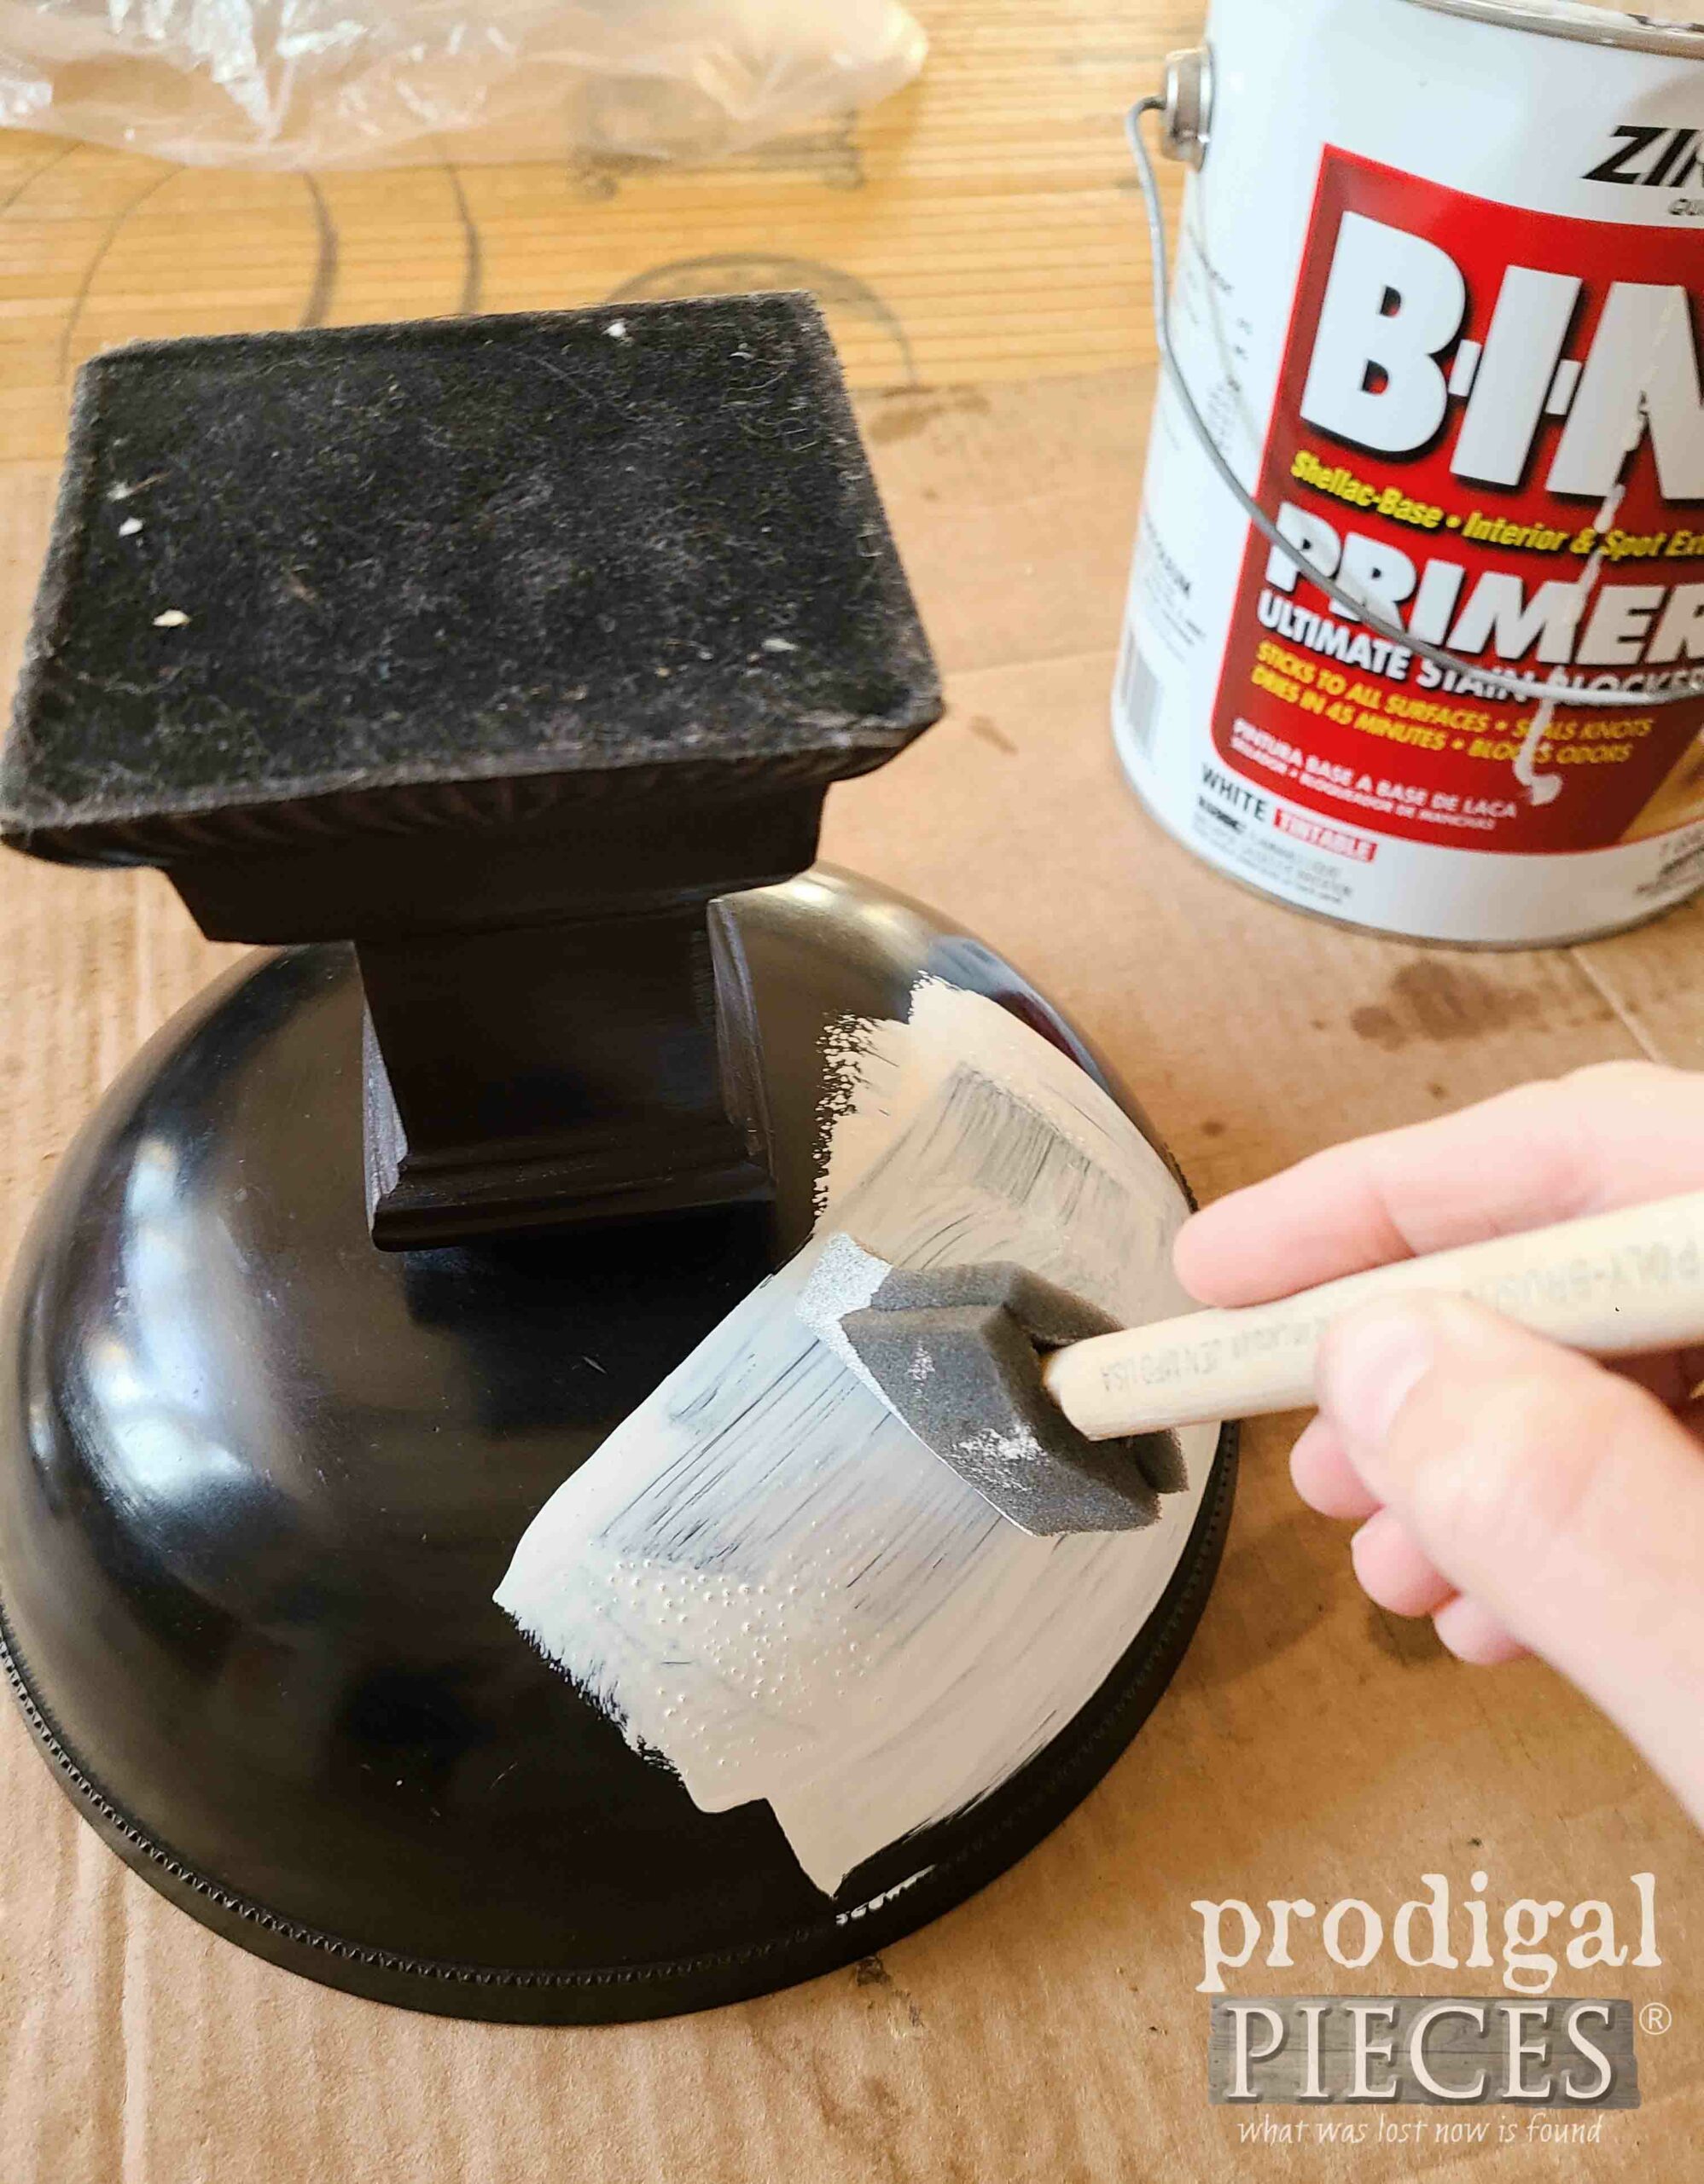 Appling Zinsser BIN primer to thrifty update compote bowl | prodigalpieces.com #prodigalpieces 